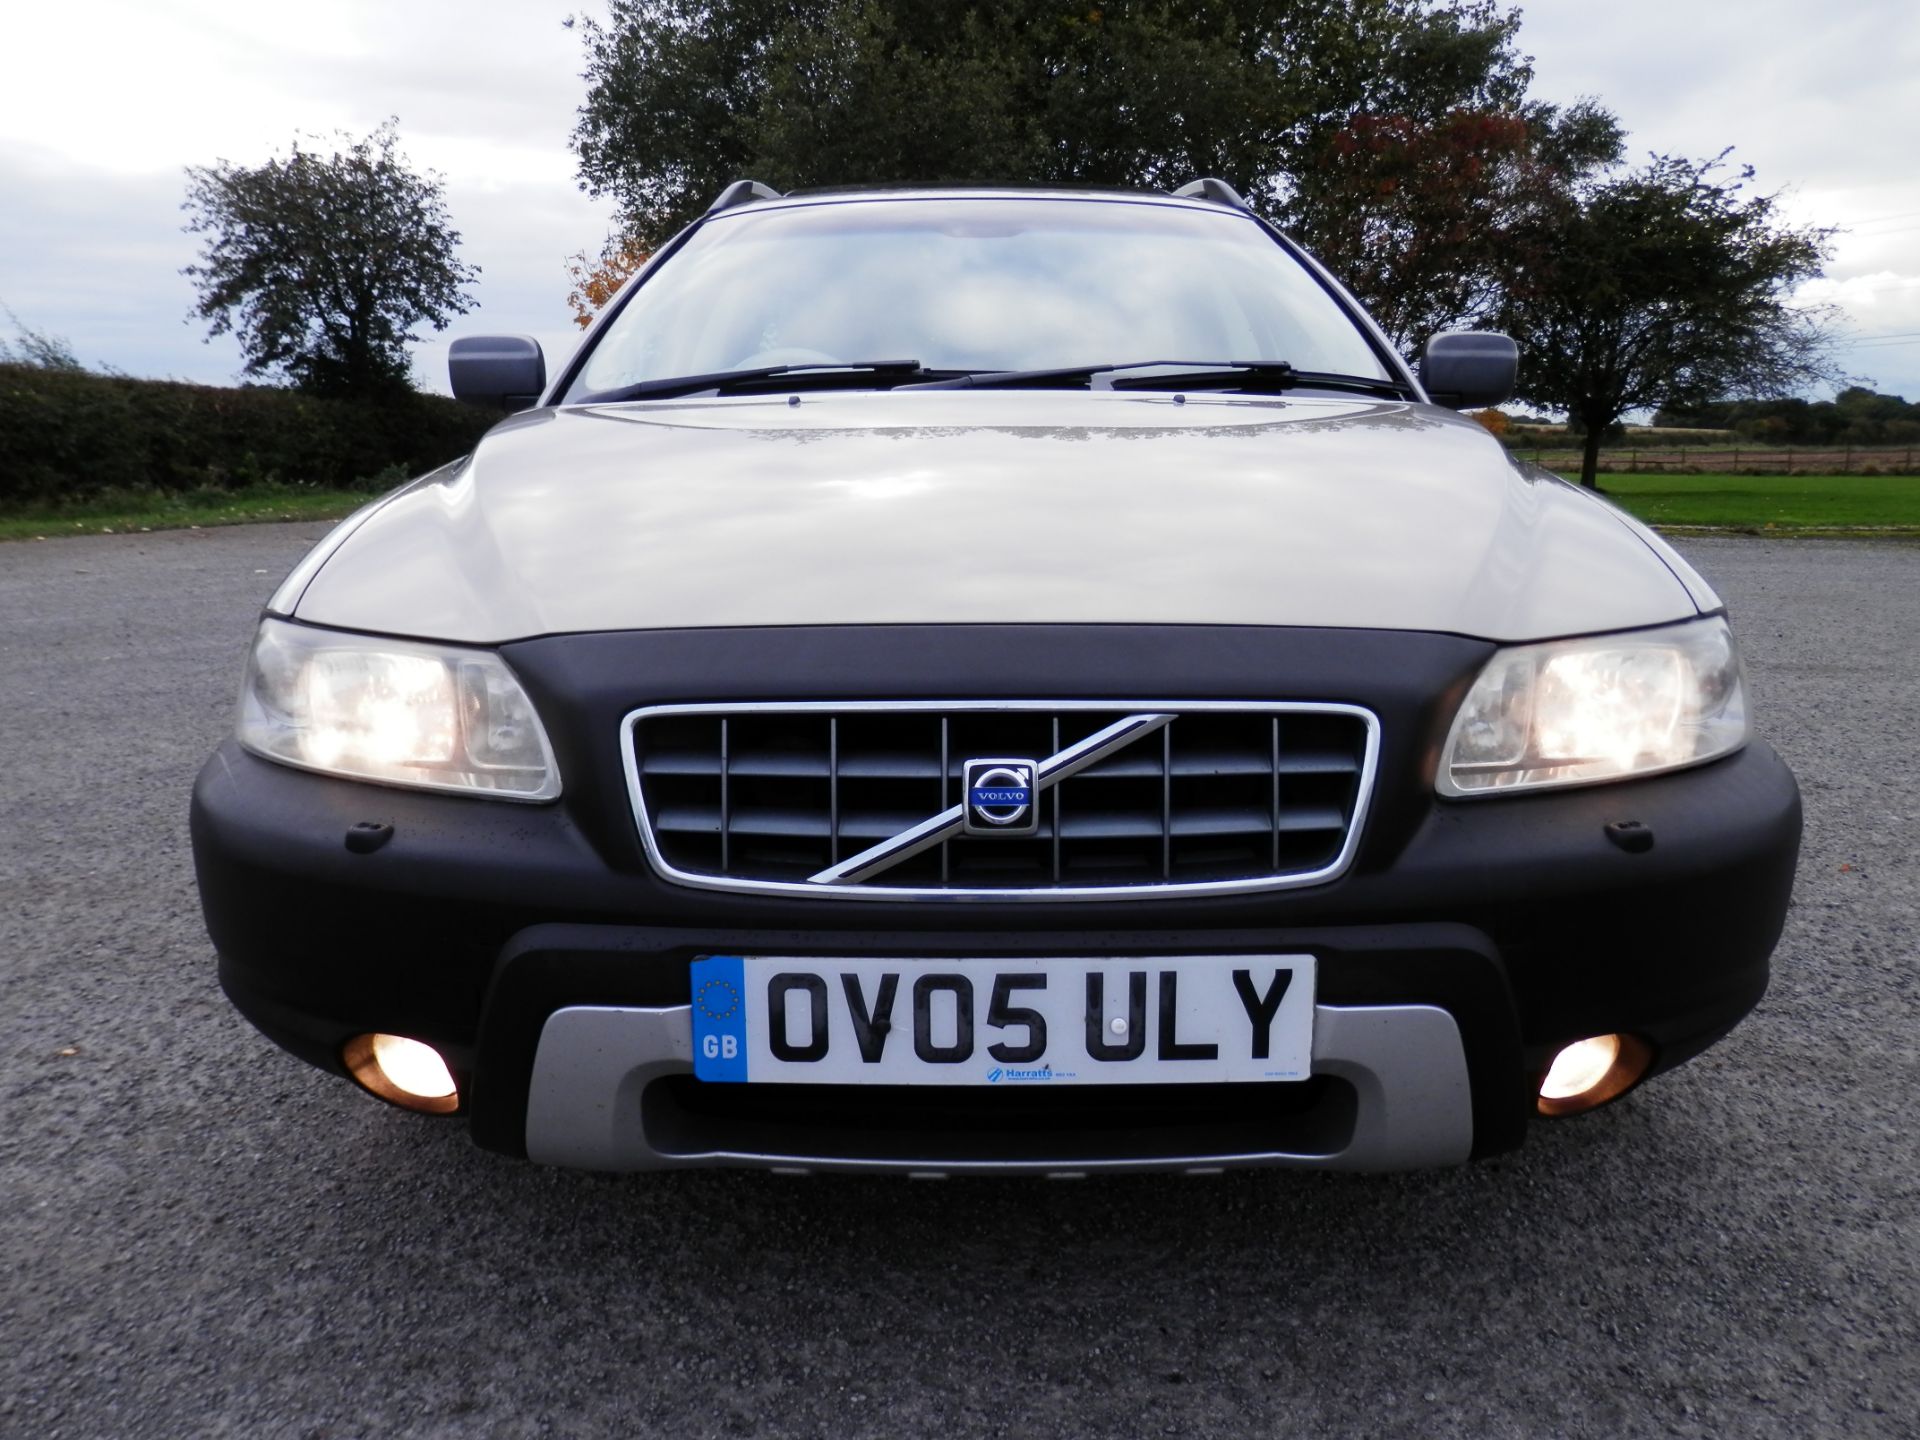 2005/05 VOLVO XC70 CROSS COUNTRY 2.4 D5 DIESEL AUTOMATIC, 4 WHEEL DRIVE, MOT MAY 2017, 150K MILES. - Image 2 of 26